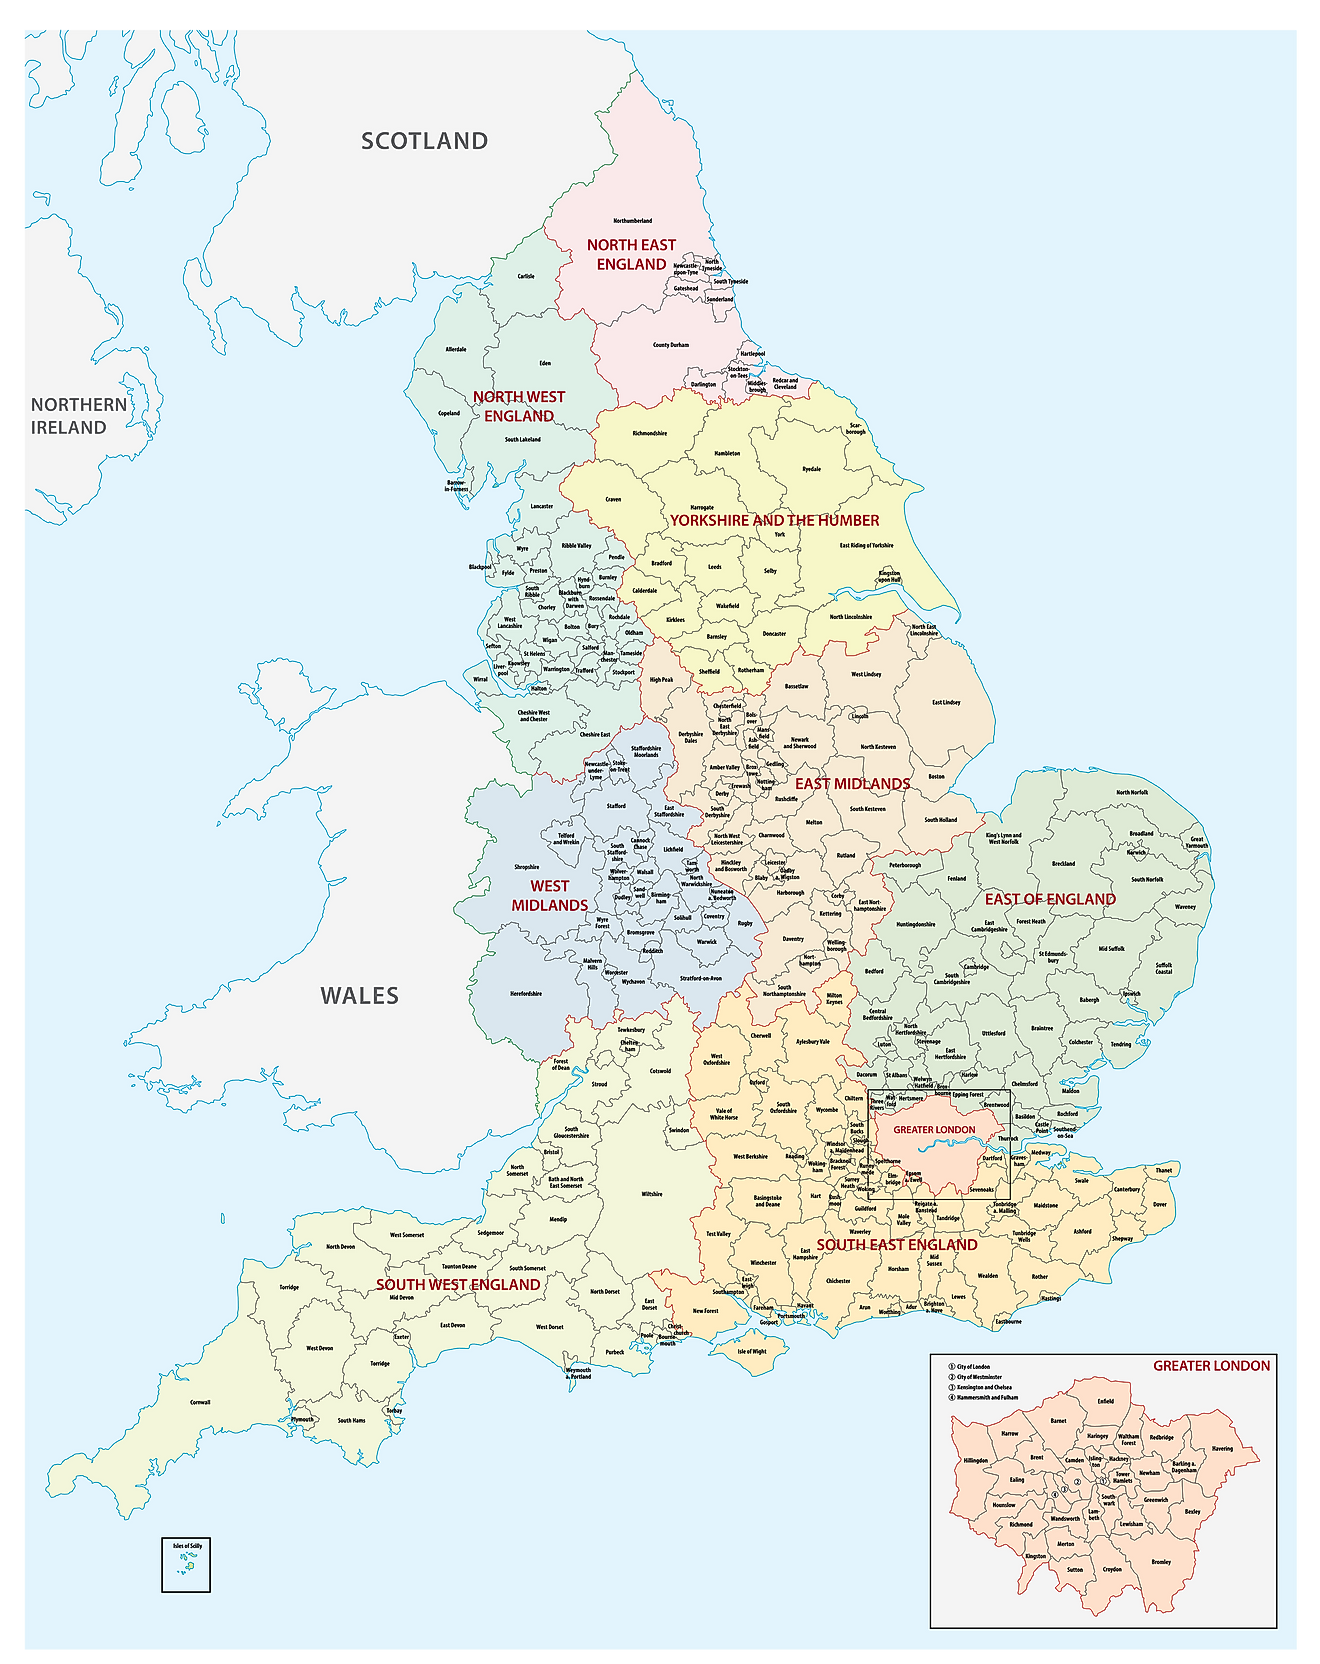 map of england